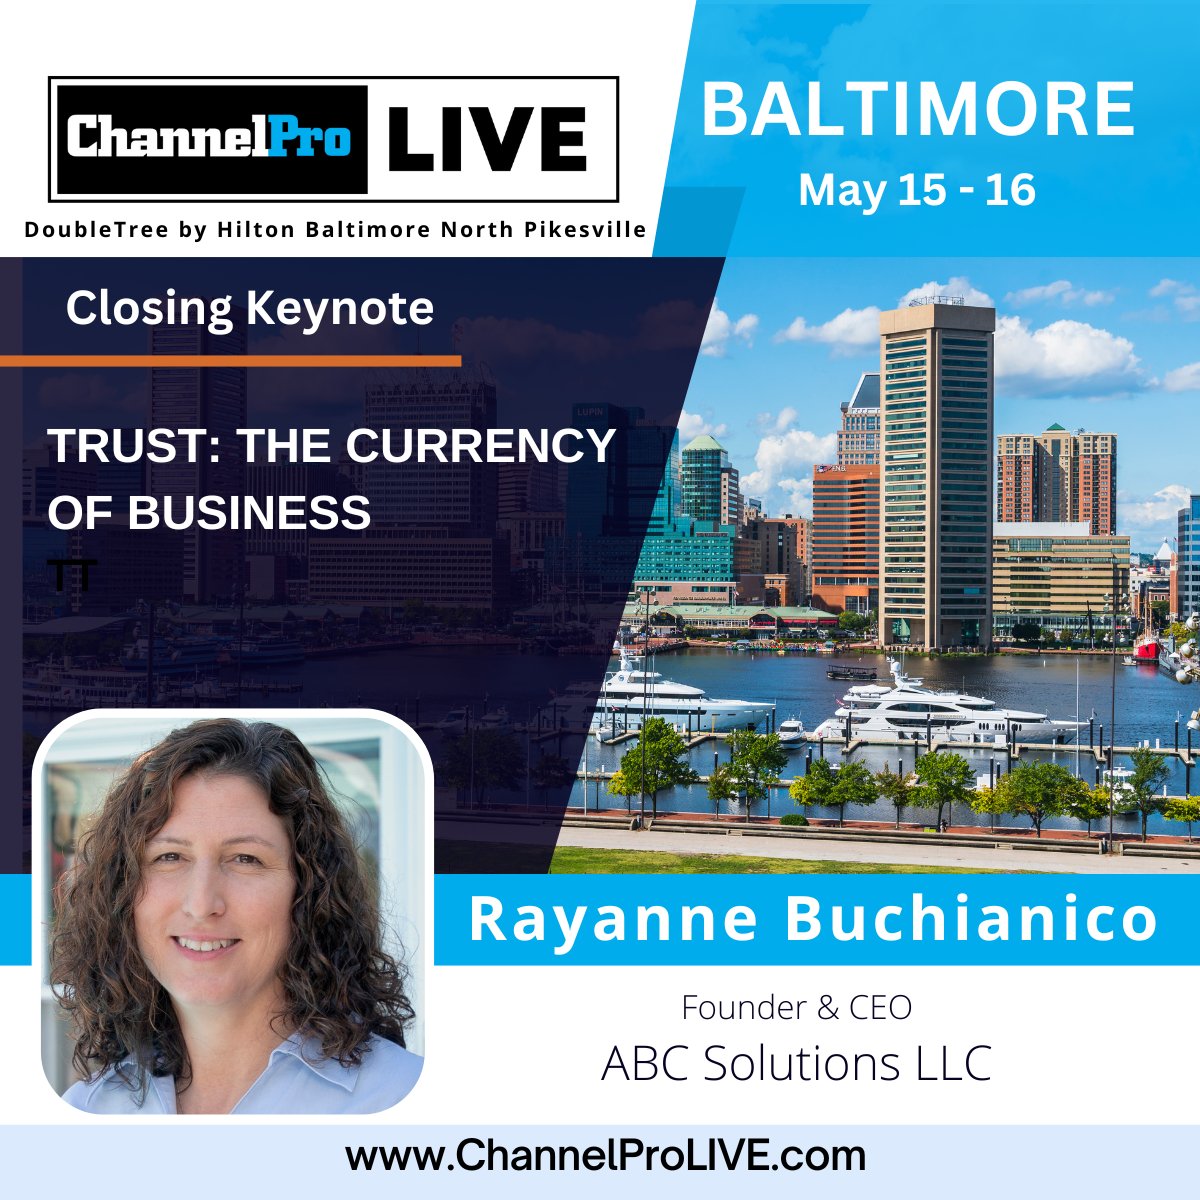 #Baltimore channel partners: It's not too late to register for #ChannelProLIVE on May 15-16 to hear business advice from channel experts like Rayanne Buchianico, who will deliver the closing keynote on the indispensable business virtue of trust. #ITevent baltimore.channelpronetwork.com